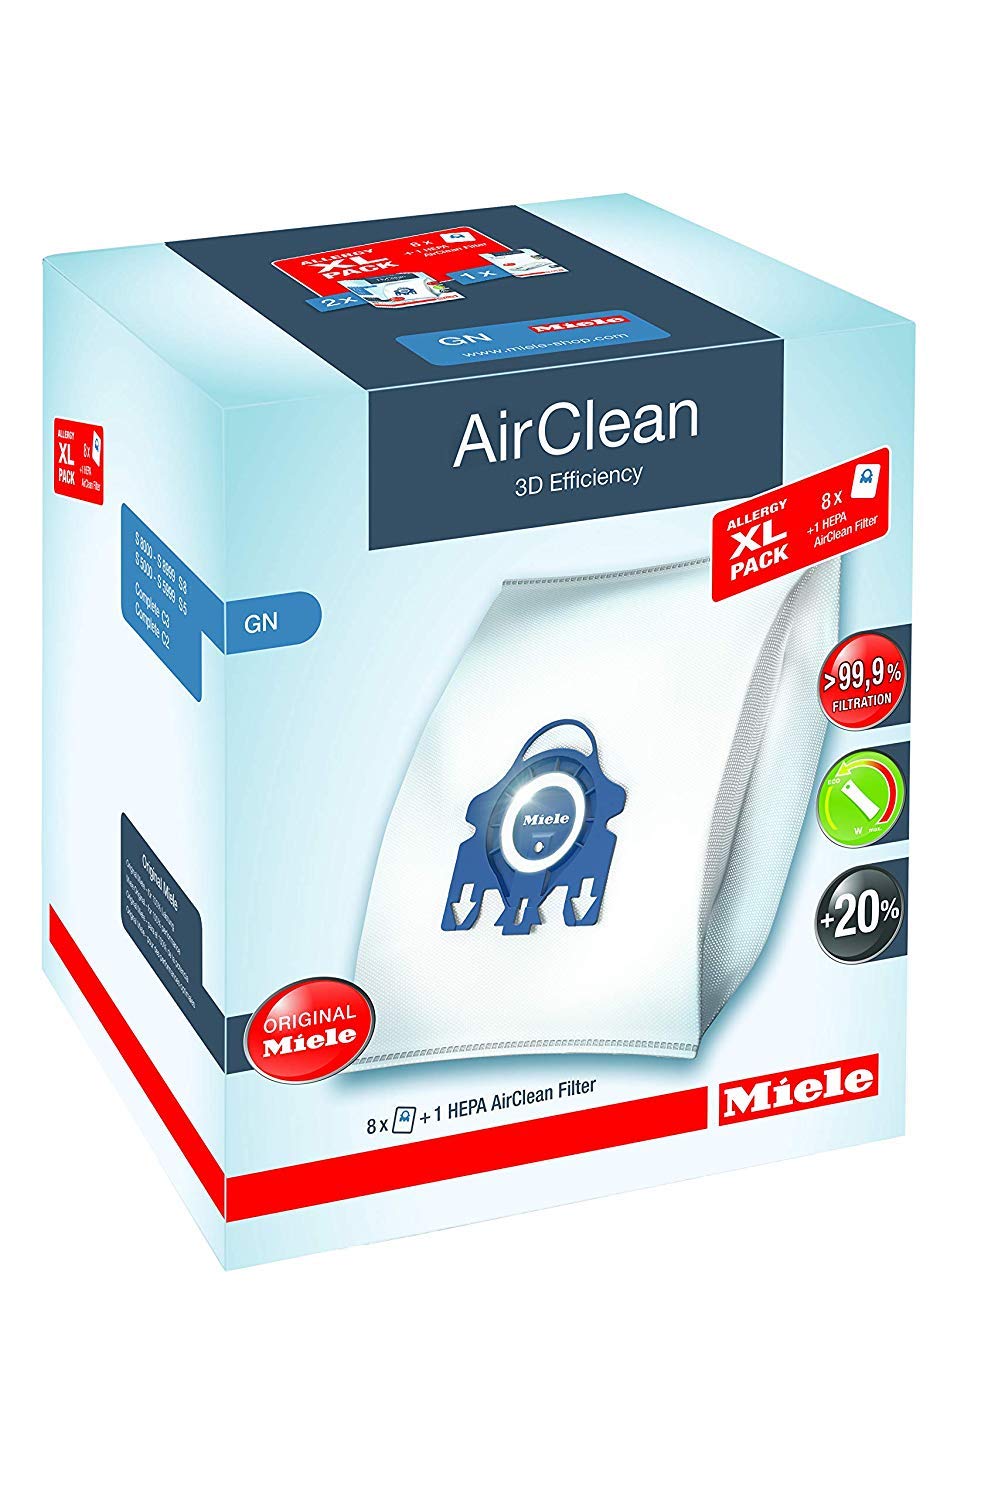 Miele AirClean 3D Efficiency Dust Bag, Type GN, Allergy XL-Pack, 8 Bags, 2 Pre-Motor Filters, and 1 HEPA Filter